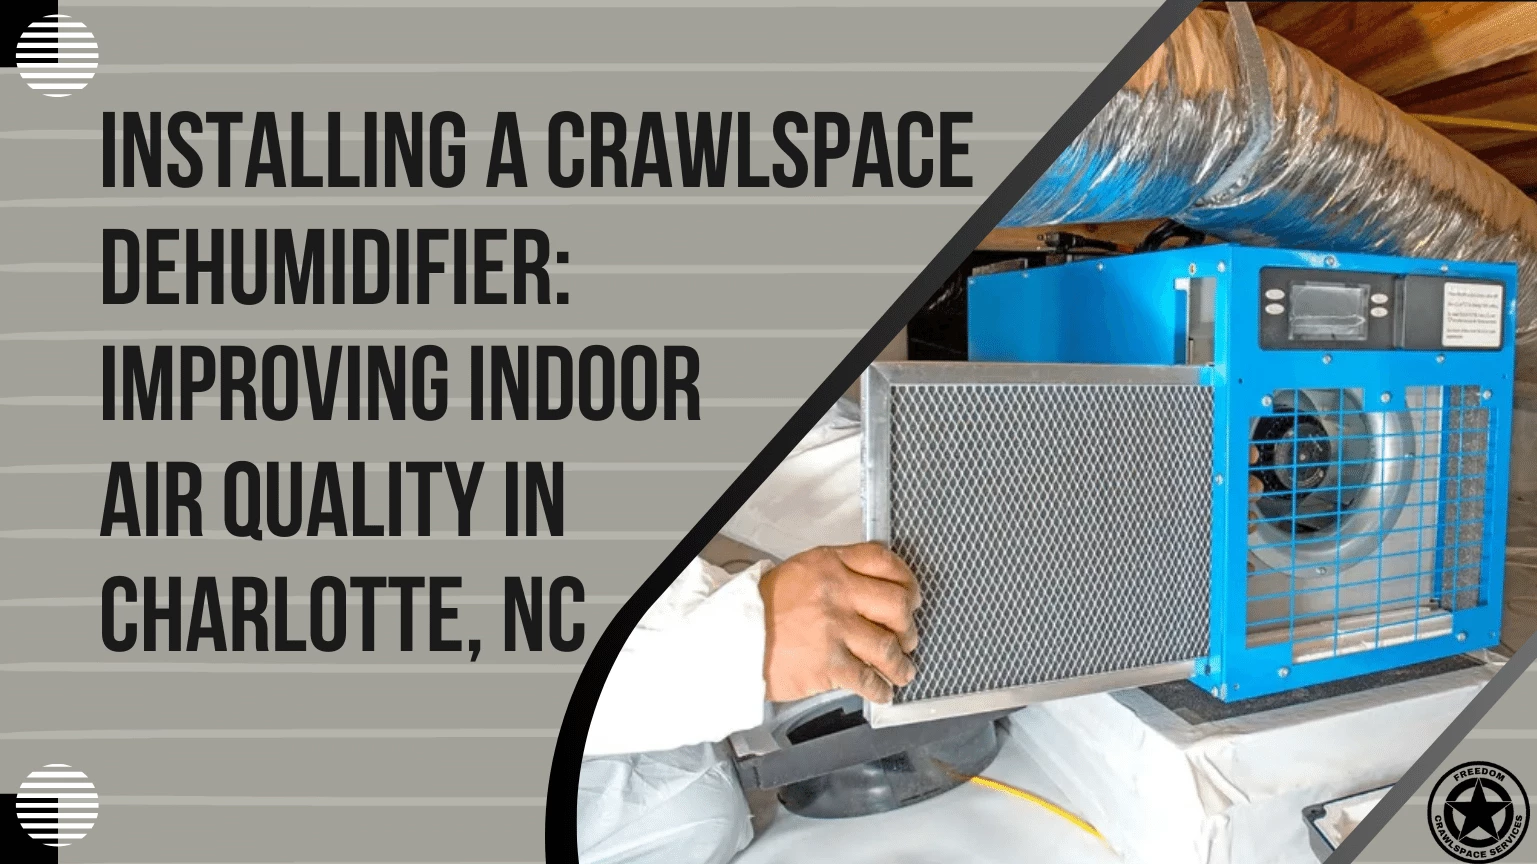 installing a crawlspace dehumidifier improving indoor air quality in charlotte, nc